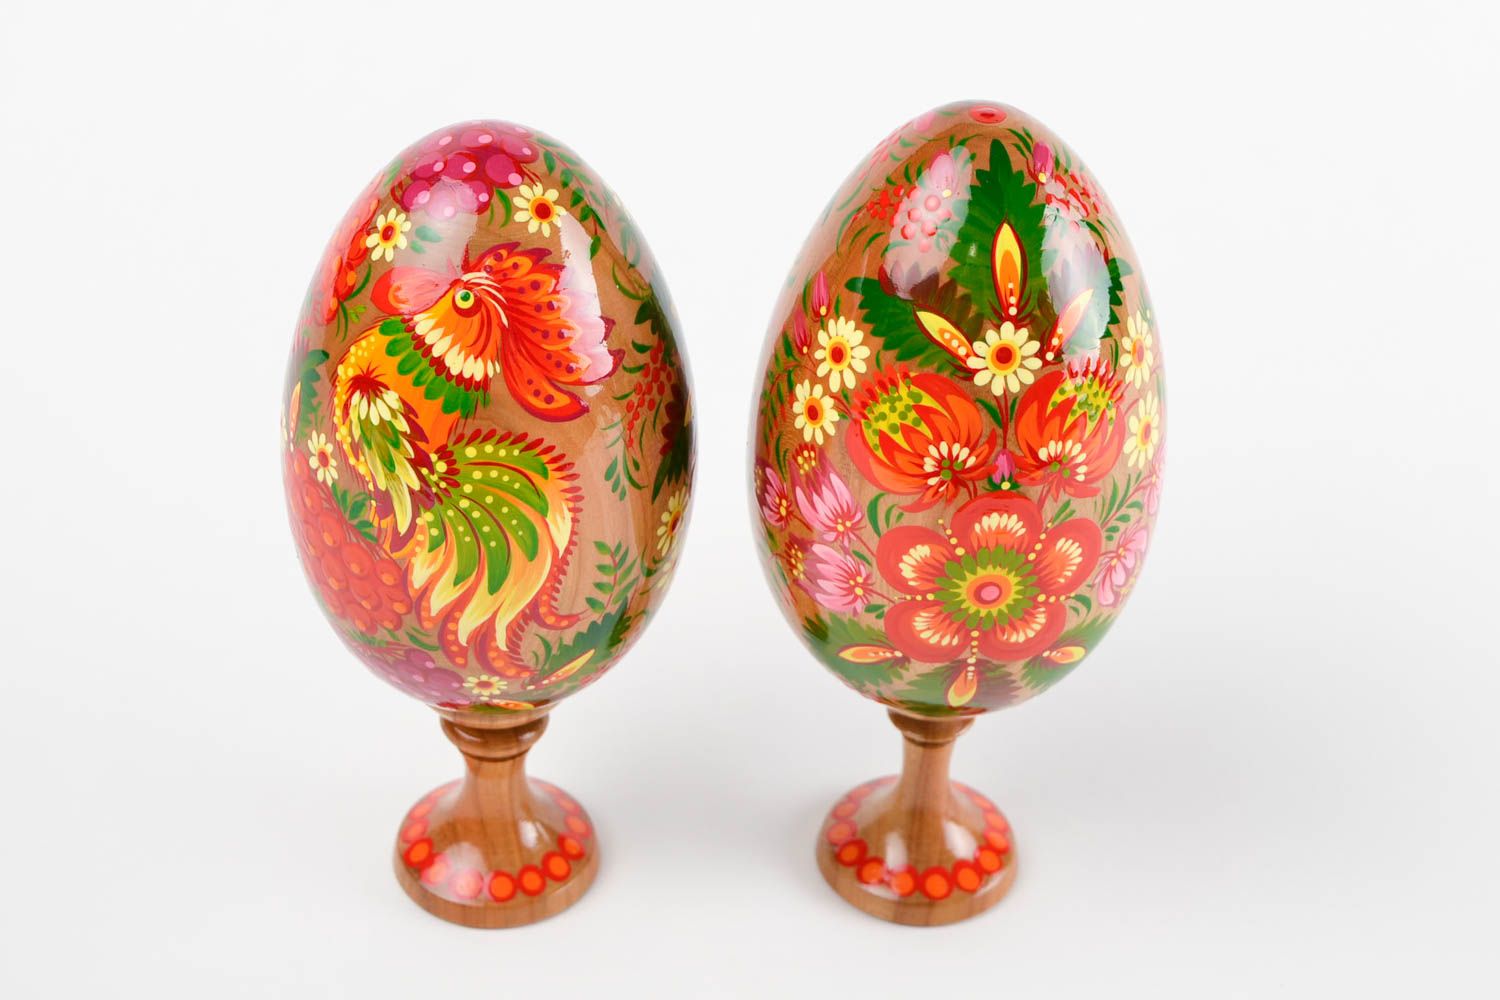 Handmade Easter eggs 2 pieces cool rooms Easter gift ideas decorative use only photo 3